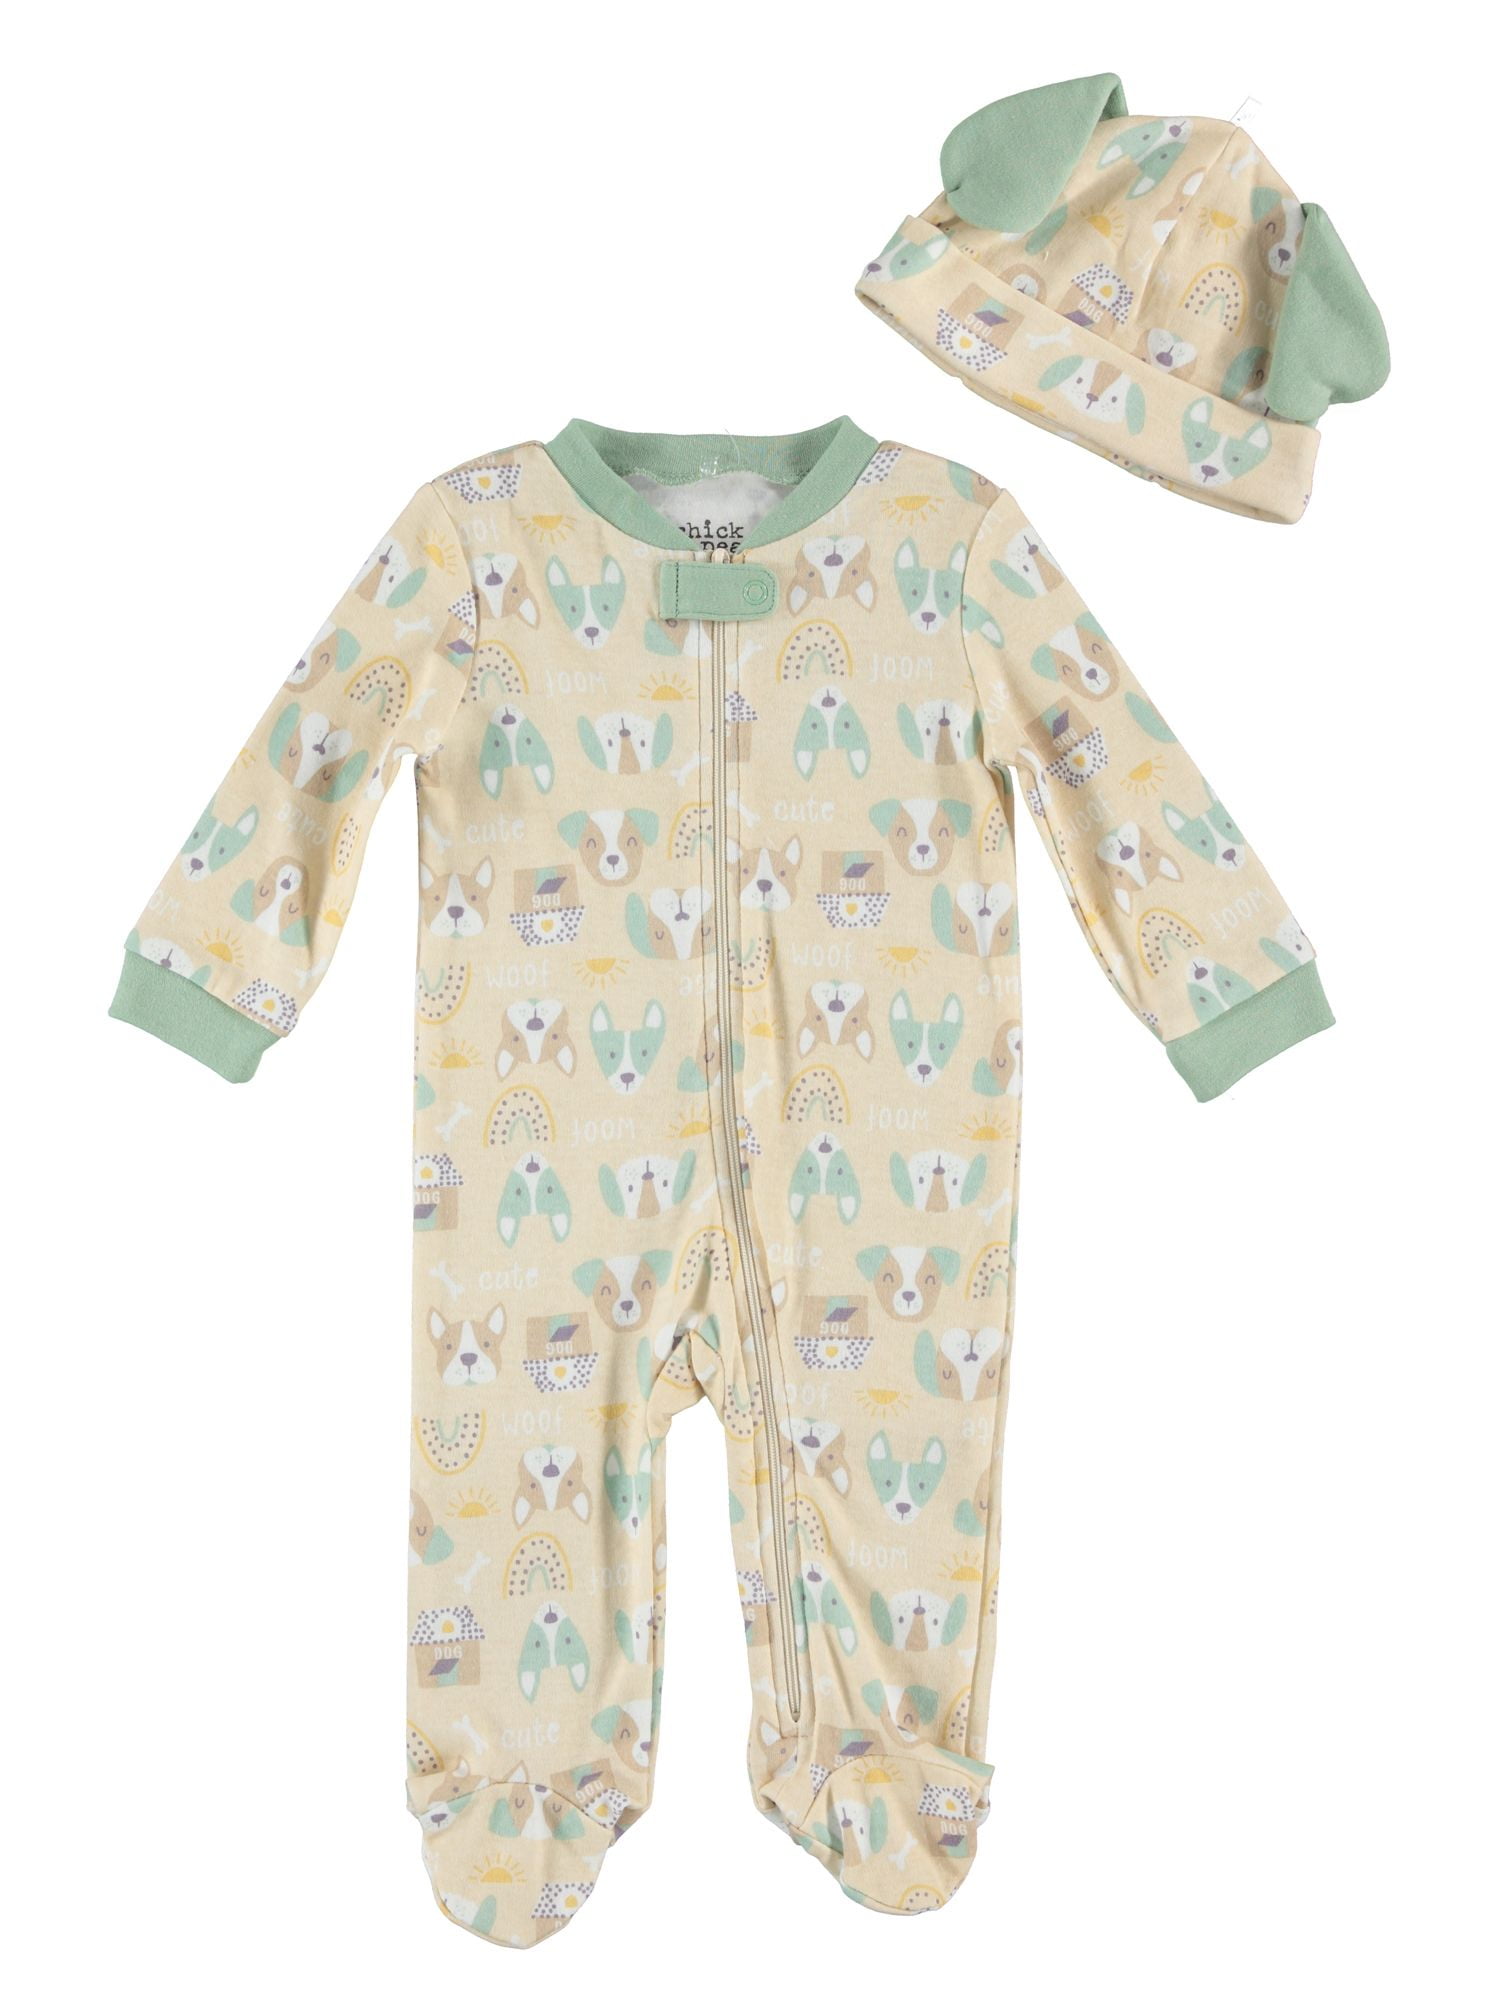 Chick Pea Baby Neutral Unisex 2pk Footed Coverall Set, Sizes Newborn-9 ...